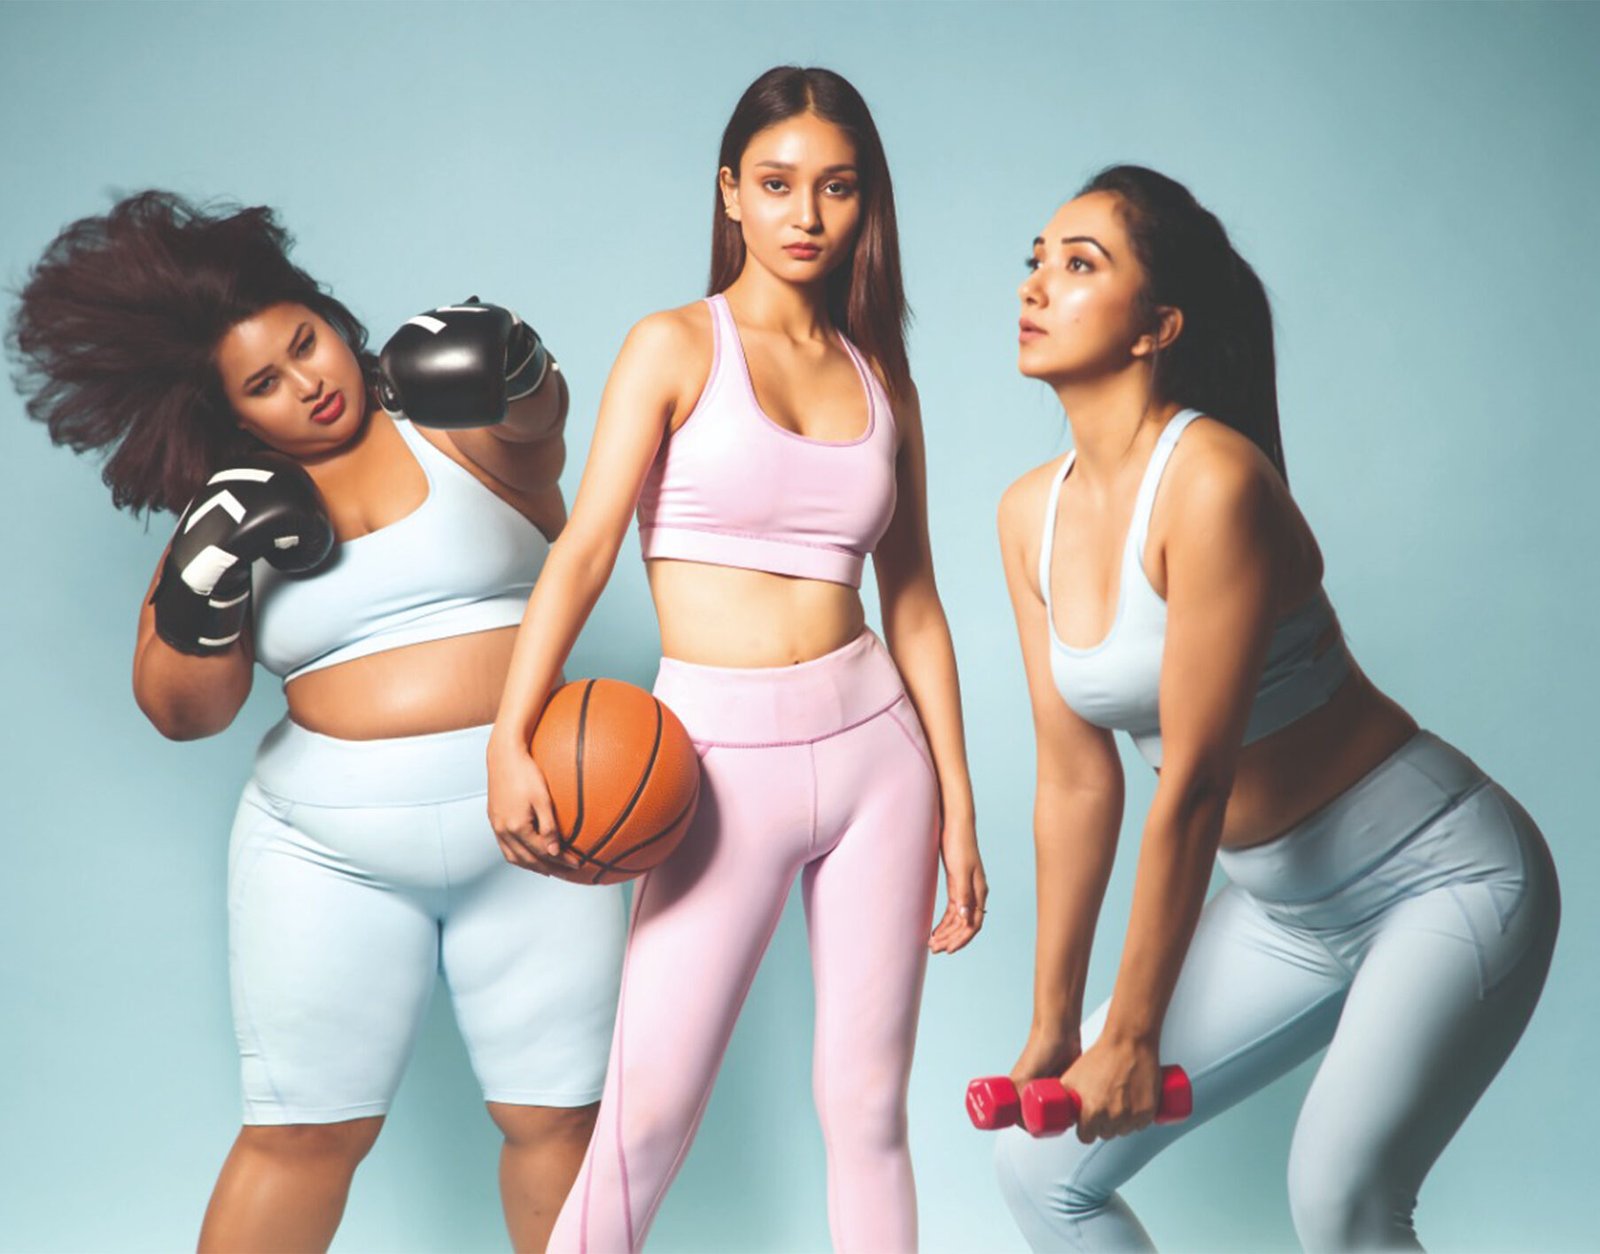 aastey, India's first size-inclusive athleisure brand with signature  sustainable blends is here! The Founders Jeevika Tyagi & Kanupriya Mundhra  tell us more - The Glitz Media